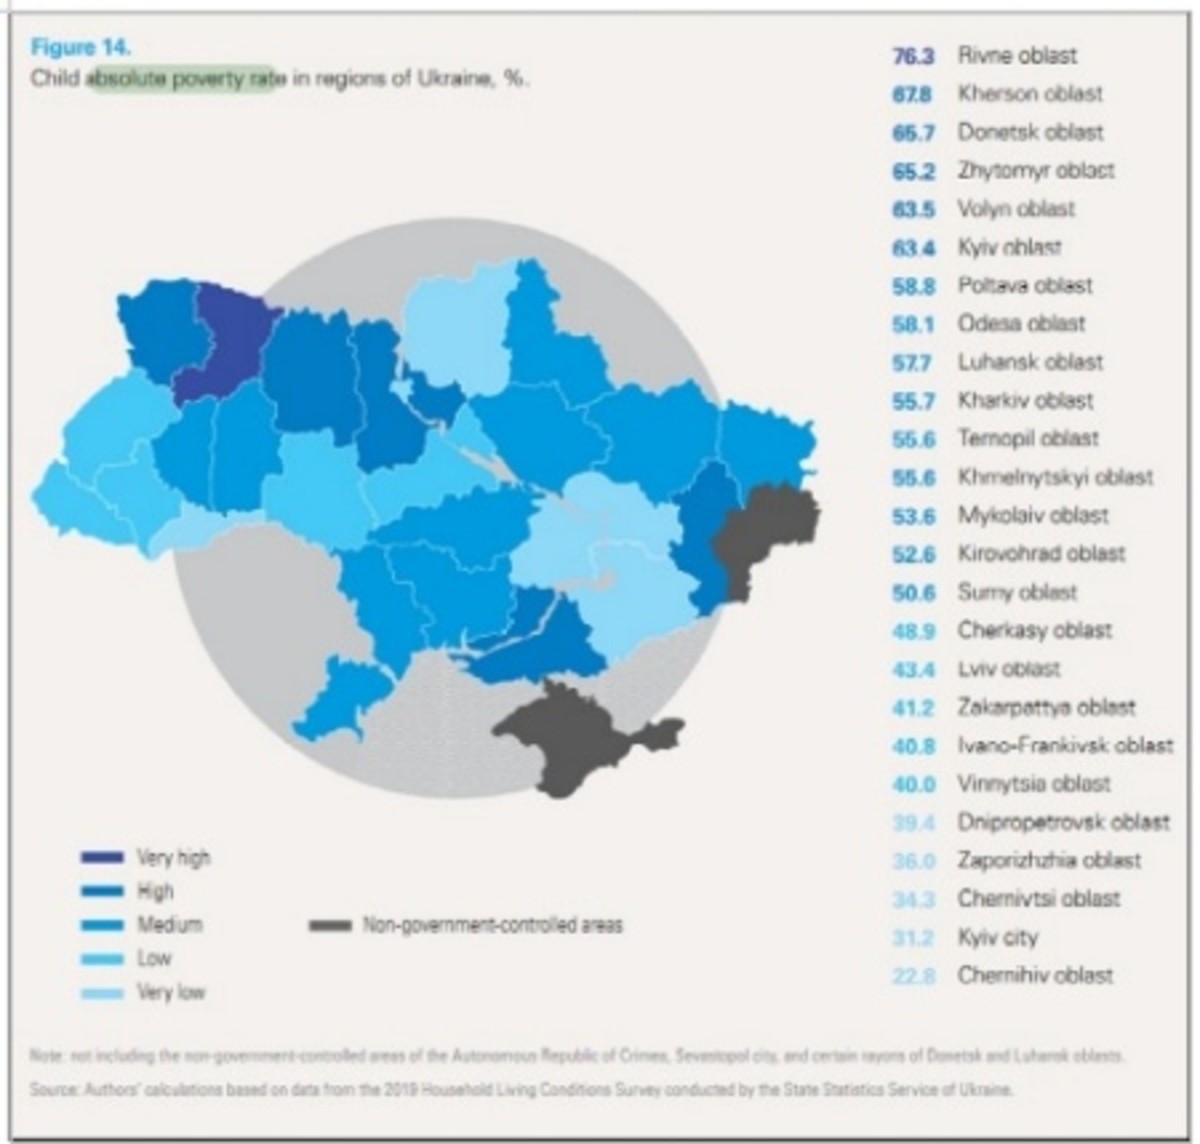 Child absolute poverty rate in Ukraine (UNICEF, 2021)